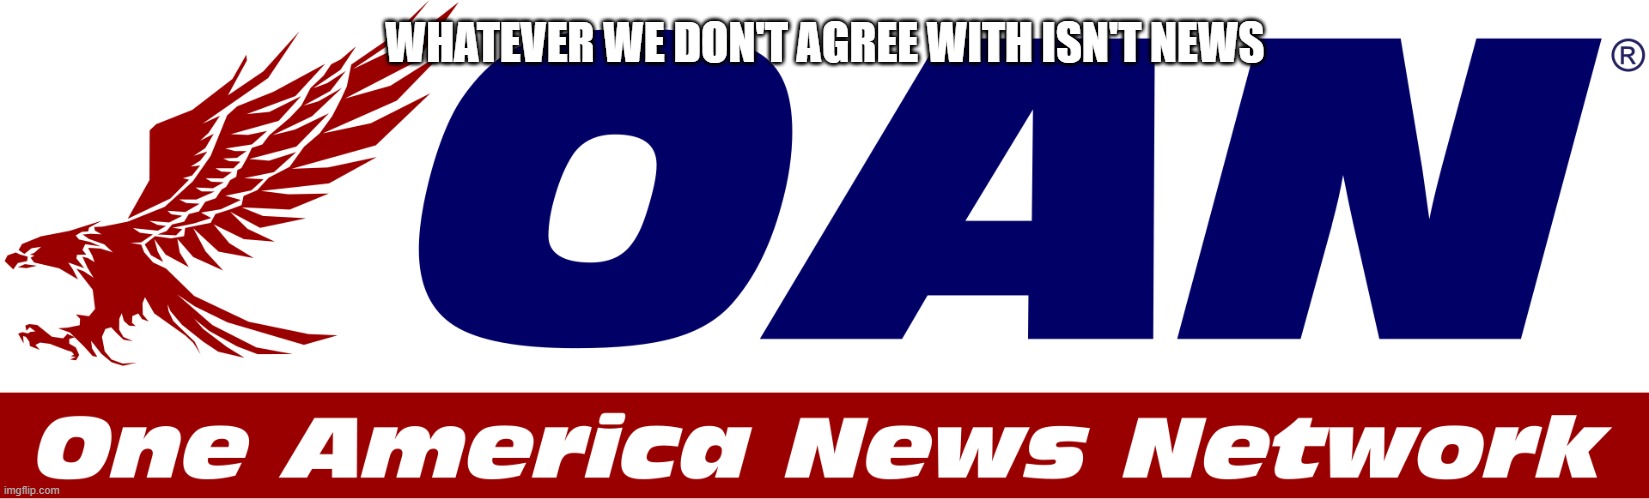 One America News is garbage | WHATEVER WE DON'T AGREE WITH ISN'T NEWS | image tagged in one america news logo,memes,one america news | made w/ Imgflip meme maker